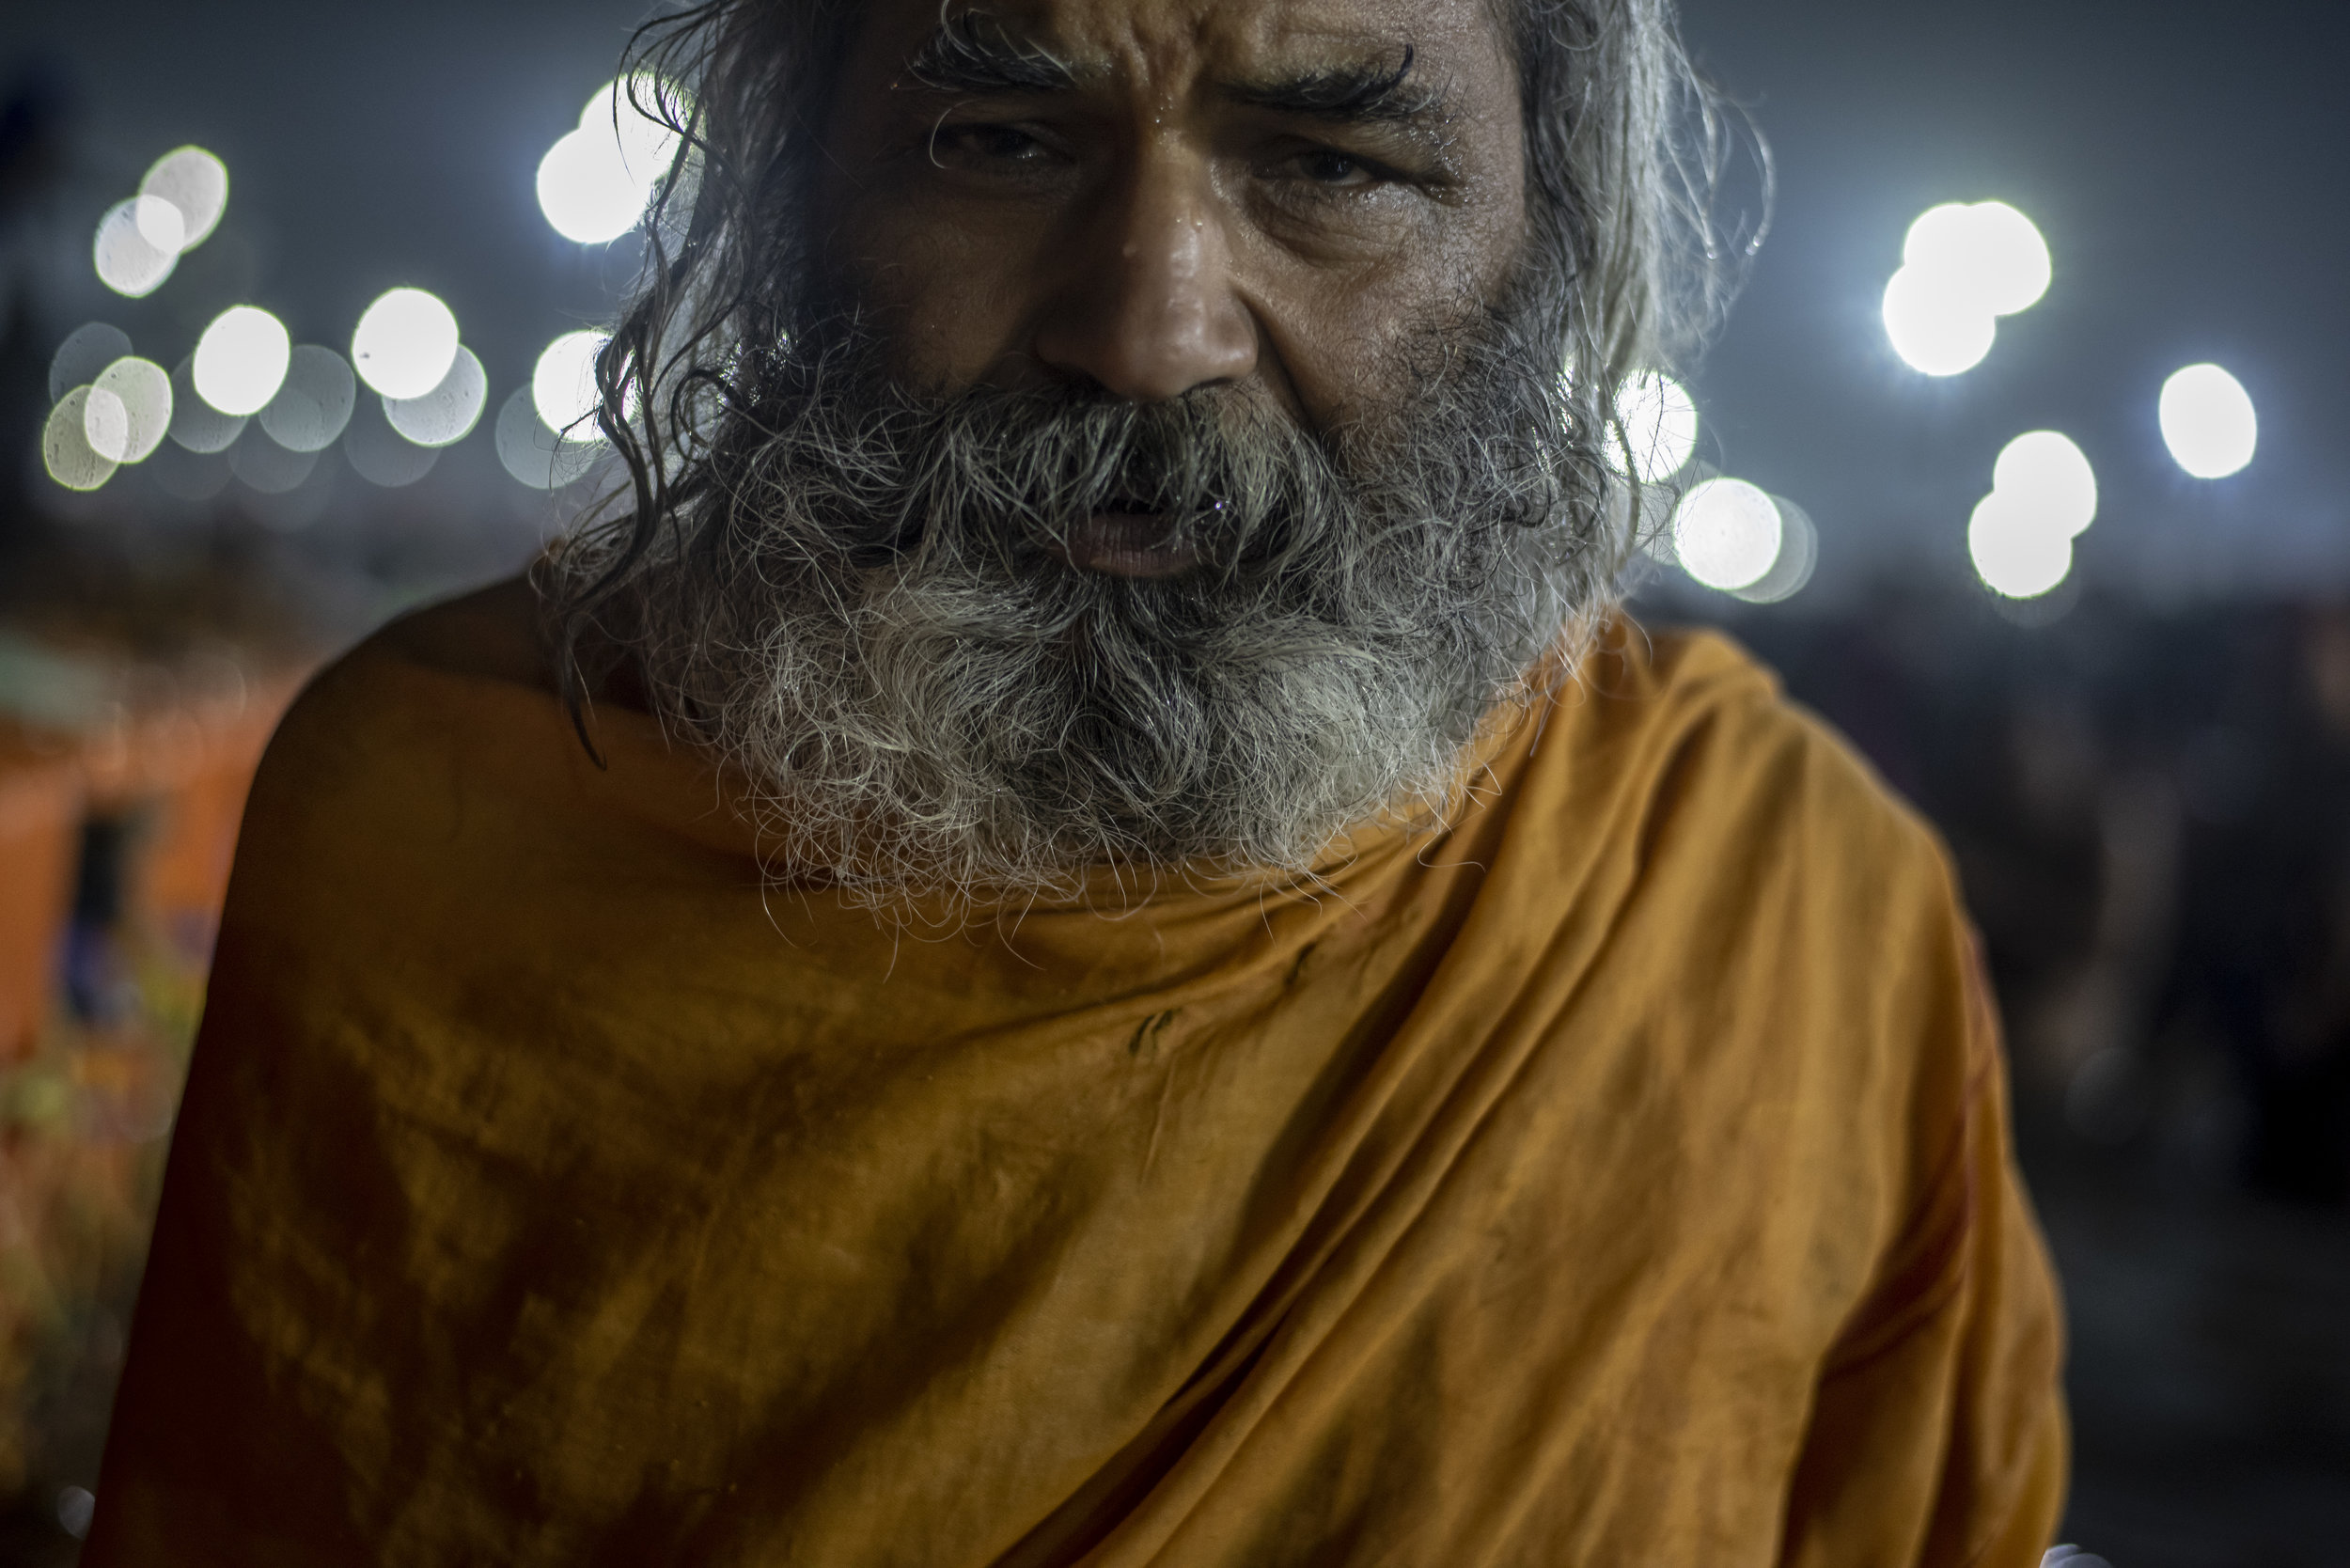  Sadhu stands stoically in the cold waters of the Ganges for almost an hour 